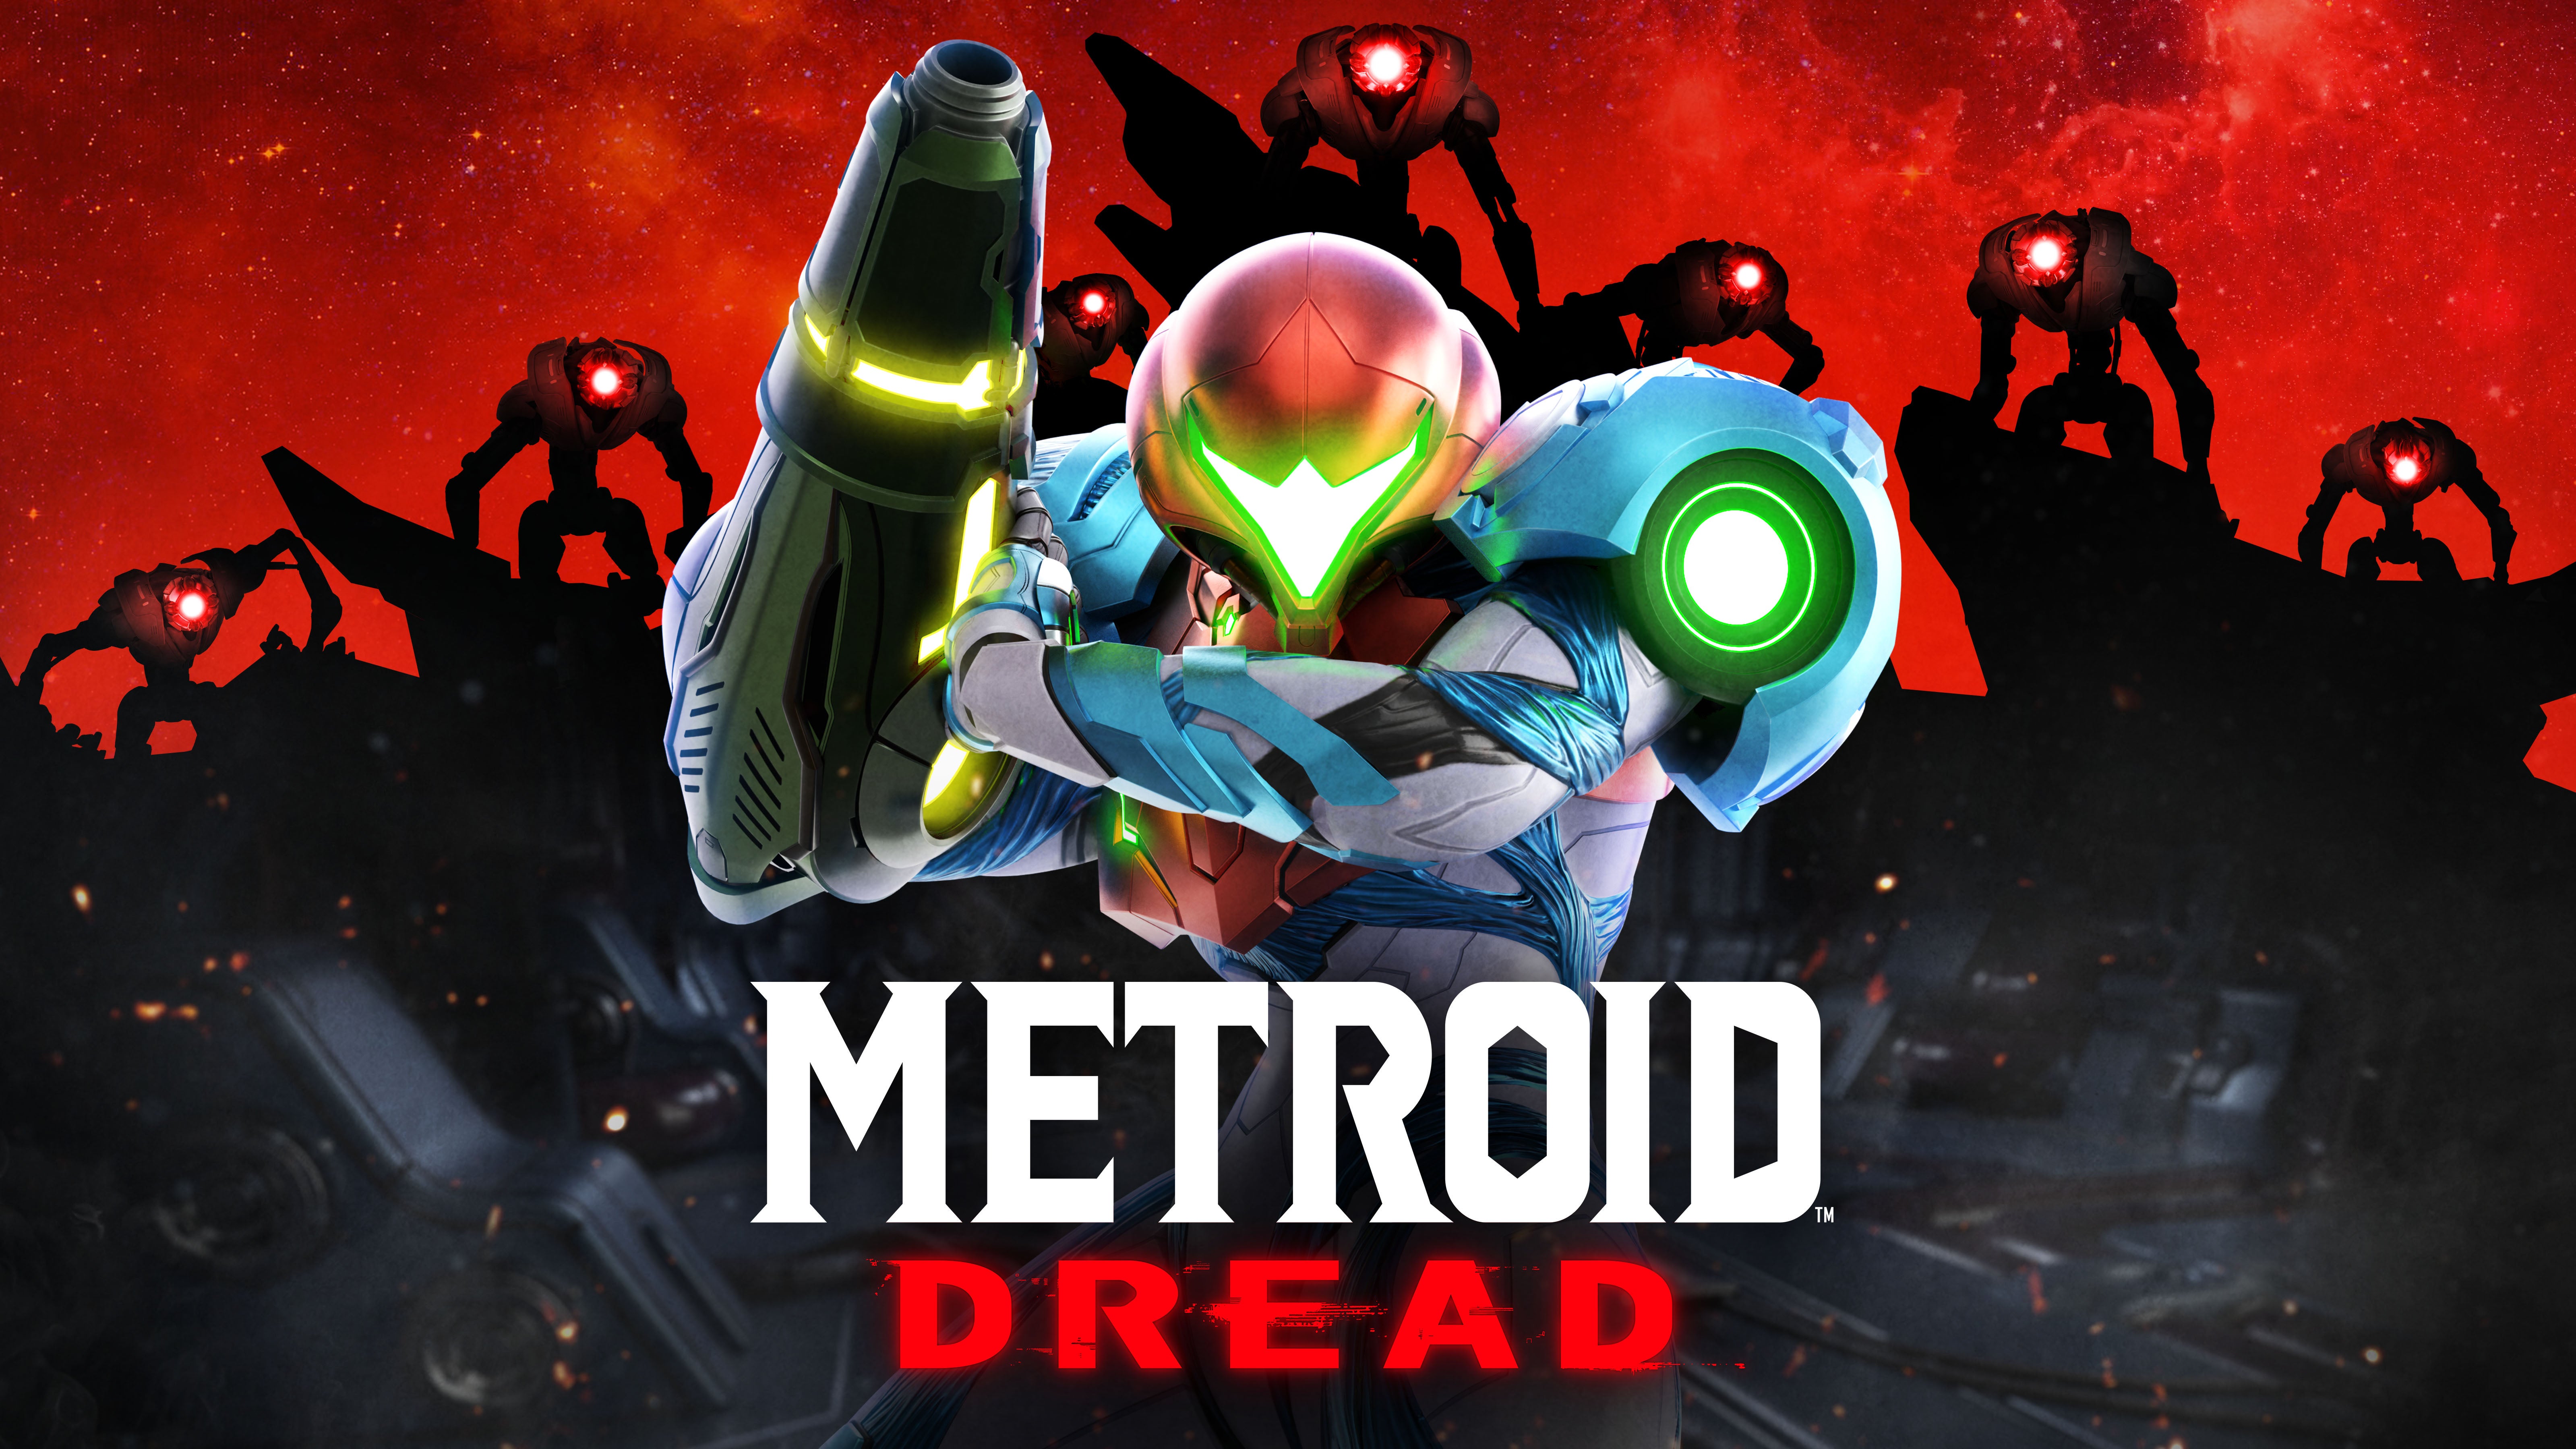 Image for Metroid Dread review: a strong adventure that’ll delight fans